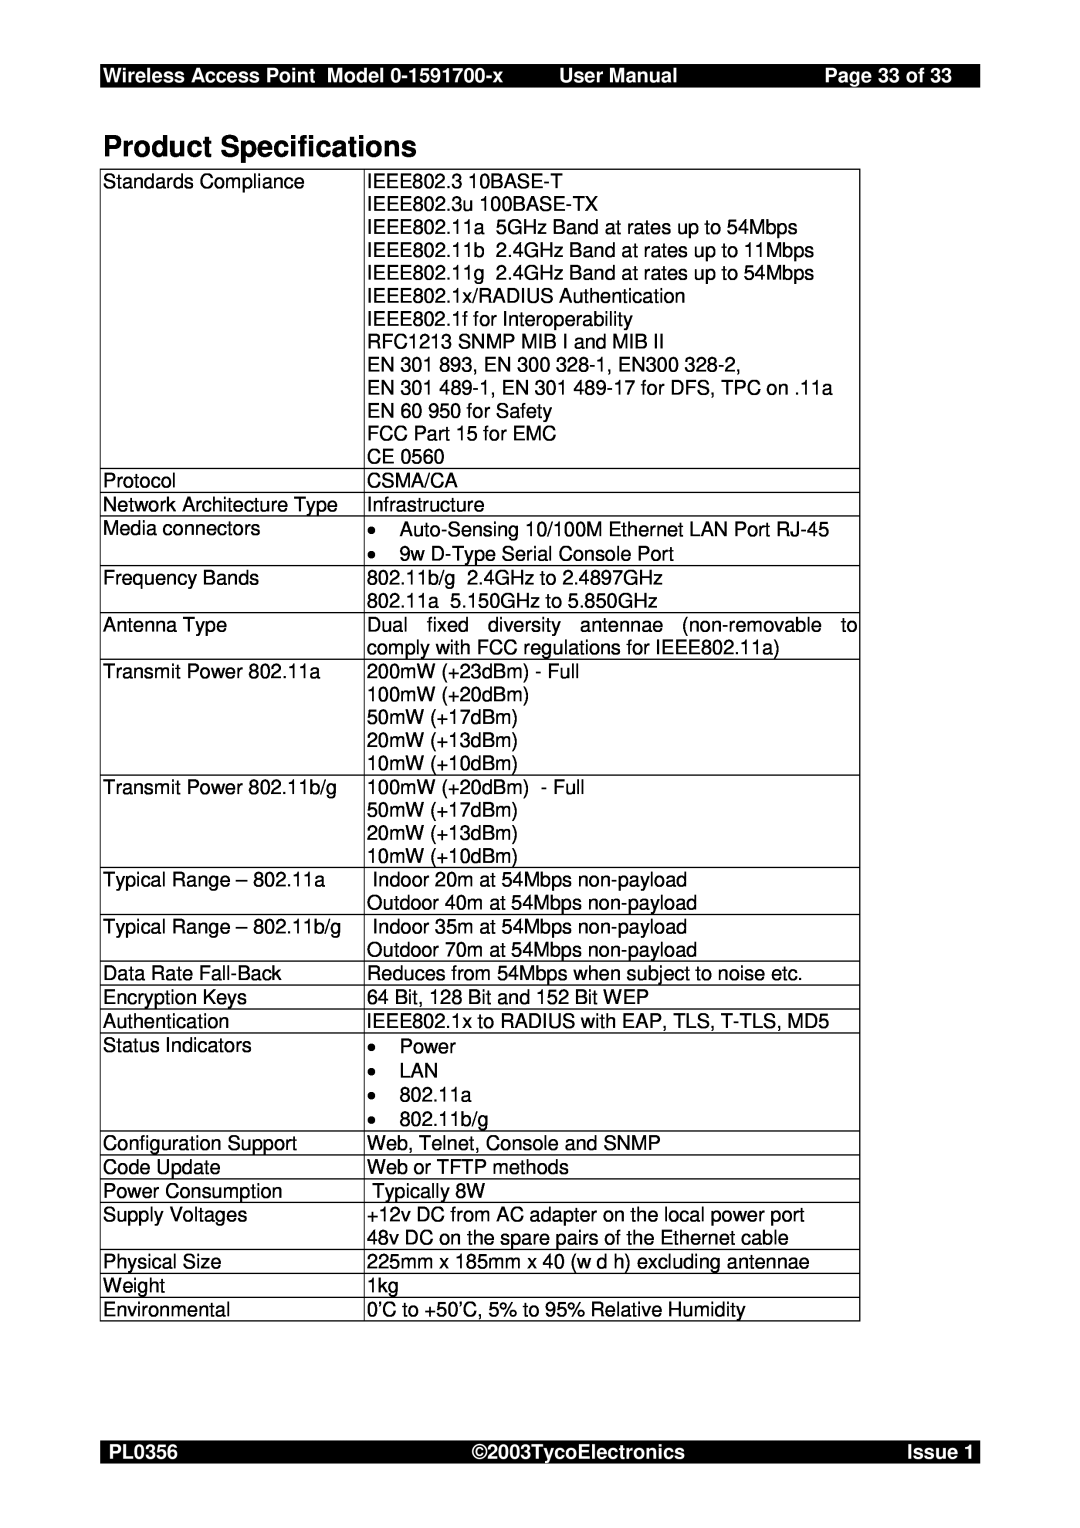 Tyco Product Specifications, Wireless Access Point Model 0-1591700-x User ManualPage 33 of, PL0356, 2003TycoElectronics 